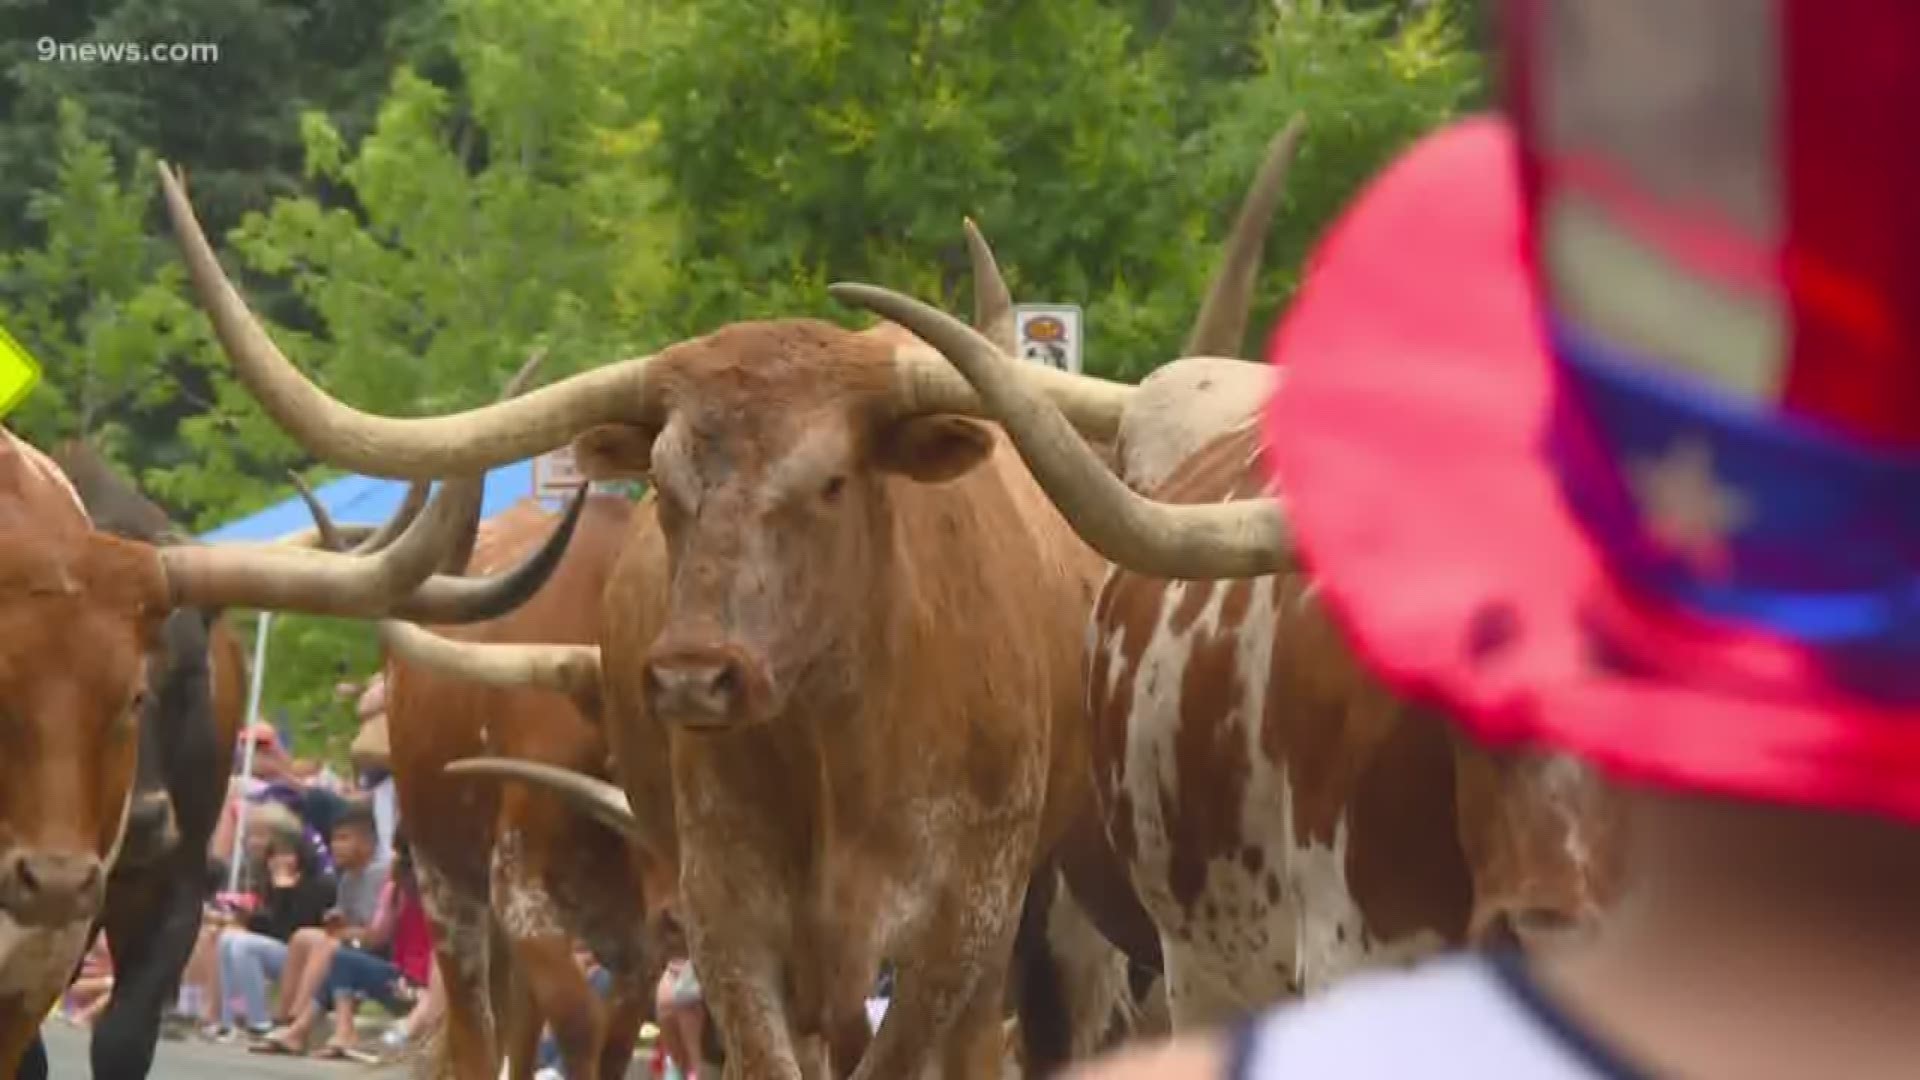 Here in Colorado, we celebrate the fourth a little differently... with longhorn cattle! For some, the tradition dates back decades. For others, it was their first parade.